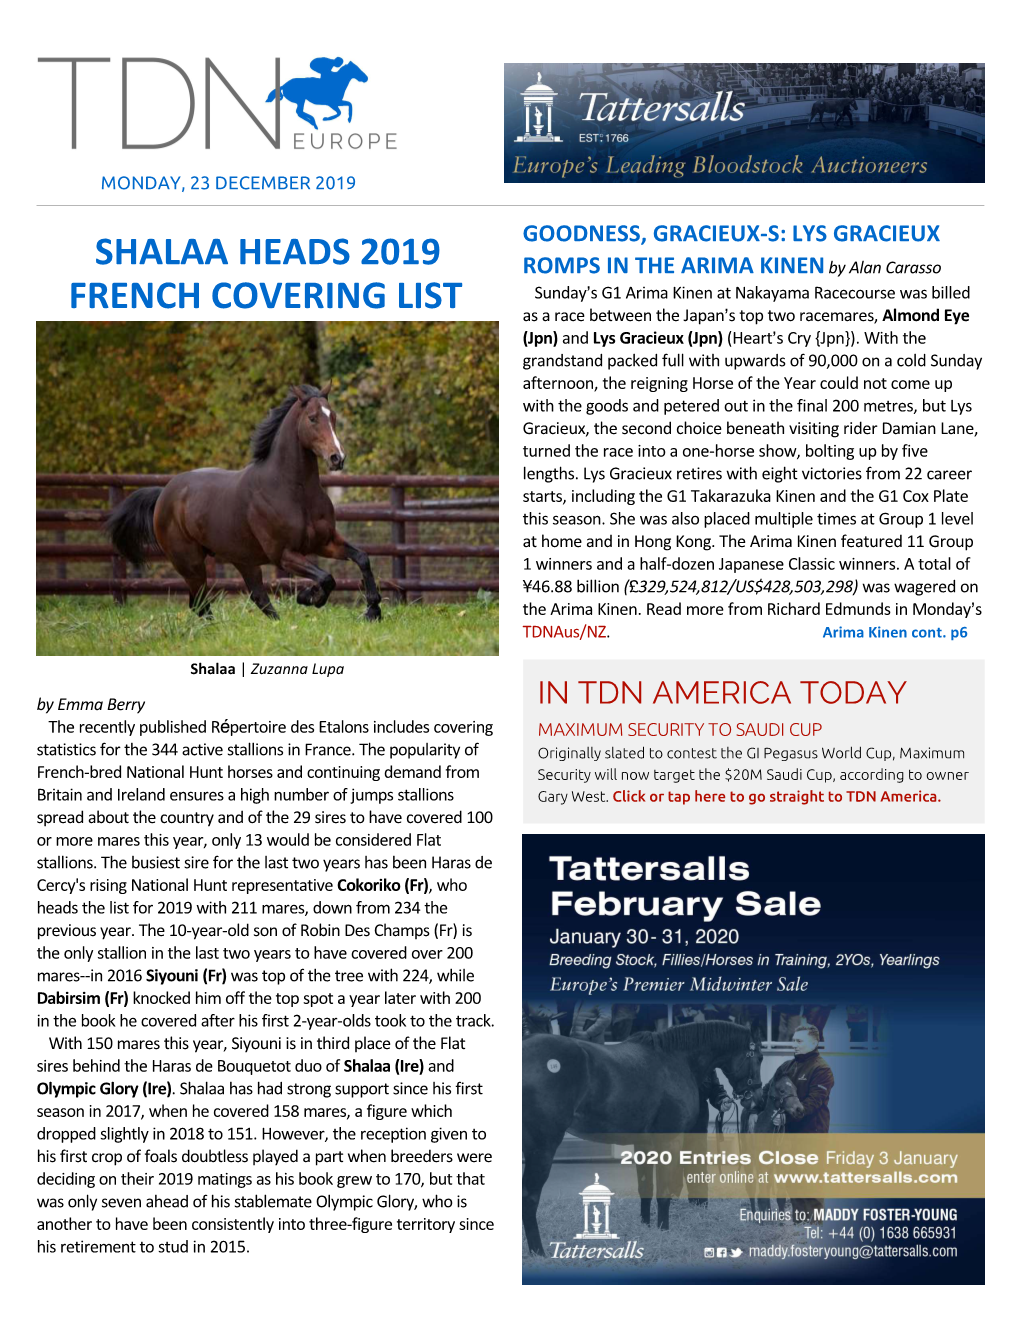 Shalaa Heads 2019 French Covering List Cont